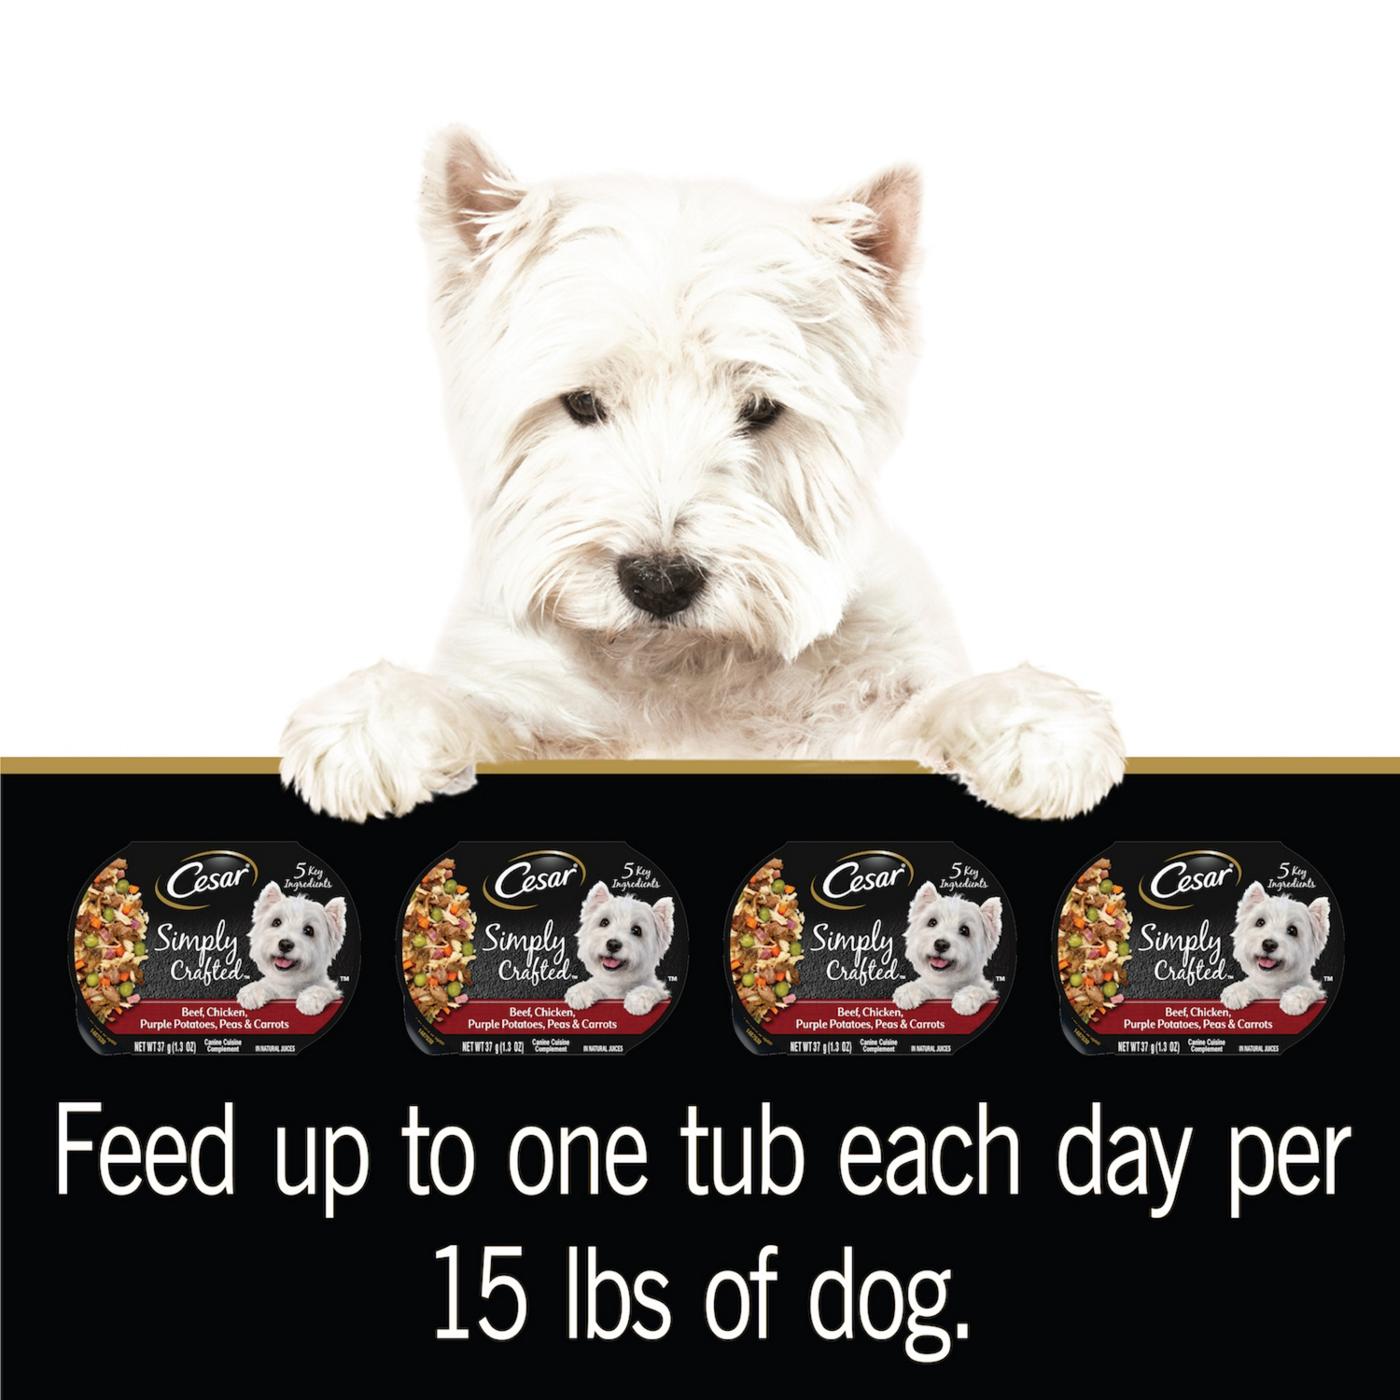 Cesar Simply Crafted Beef & Chicken Wet Dog Food; image 2 of 5